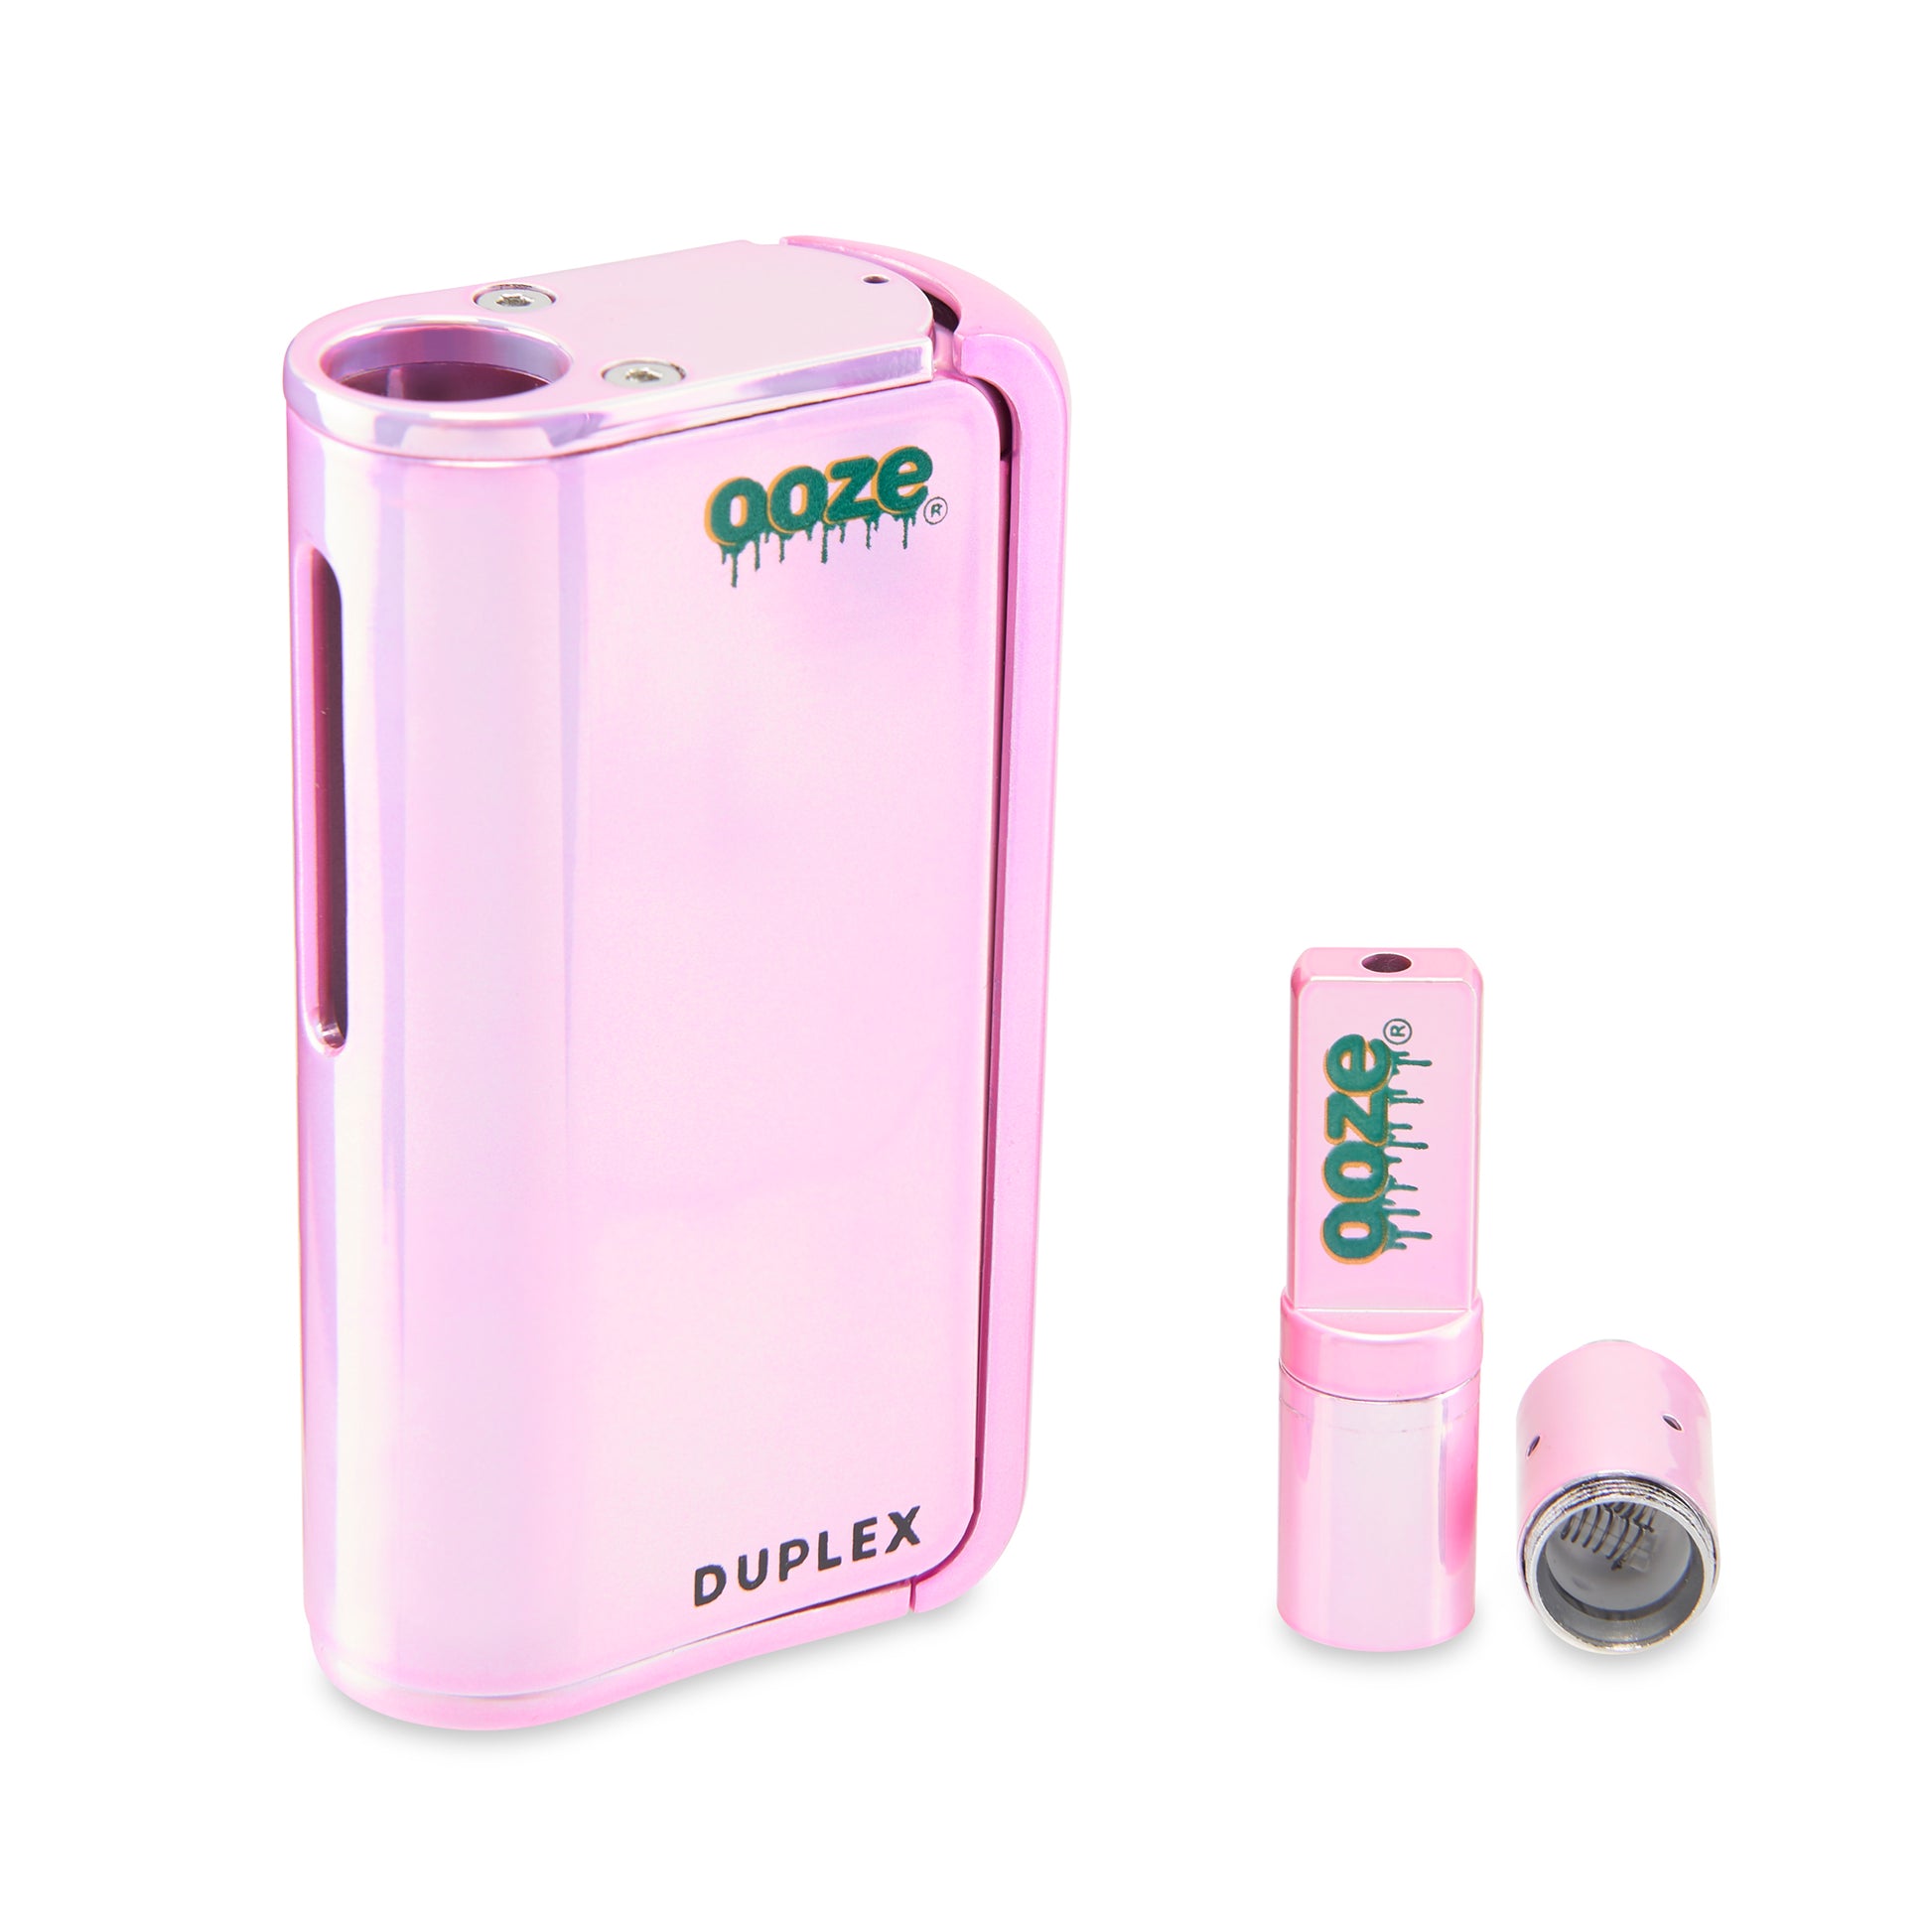 The Ice Pink Ooze Duplex Pro Vaporizer is shown on an angle next to the wax atomizer that is unscrewed to show the dual quartz coil.